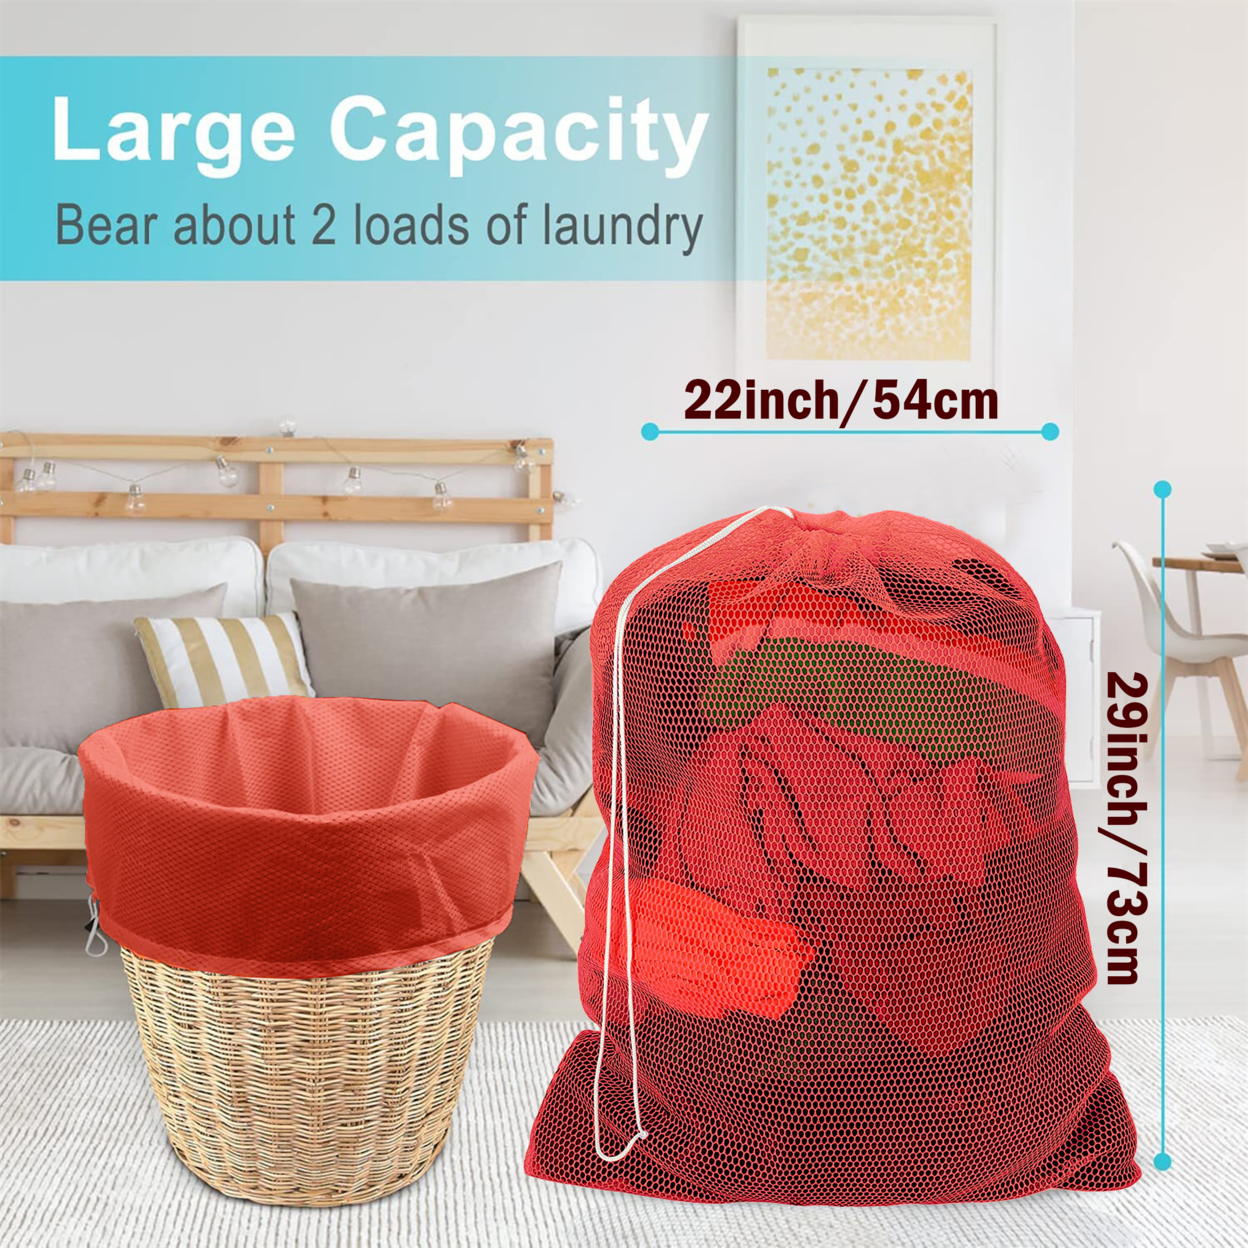 Multi-Pack Lightweight Mesh Laundry Bag With Drawstring Top - 2-Pack